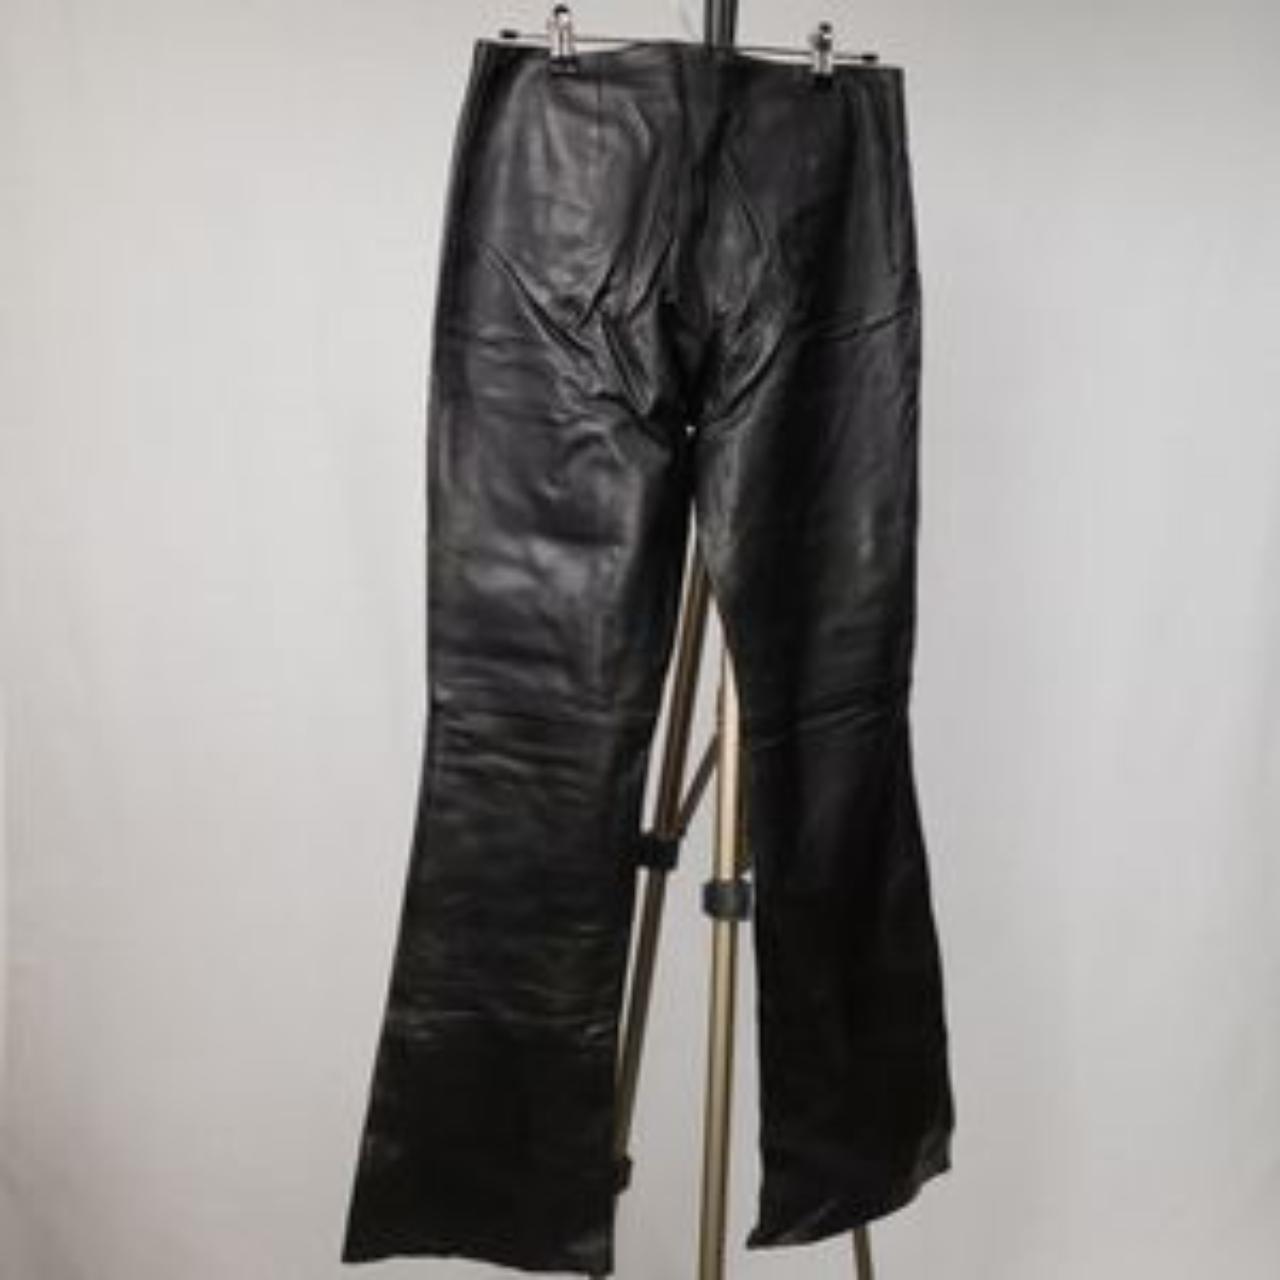 Soft lambskin leather Cache pants. These just follow... - Depop